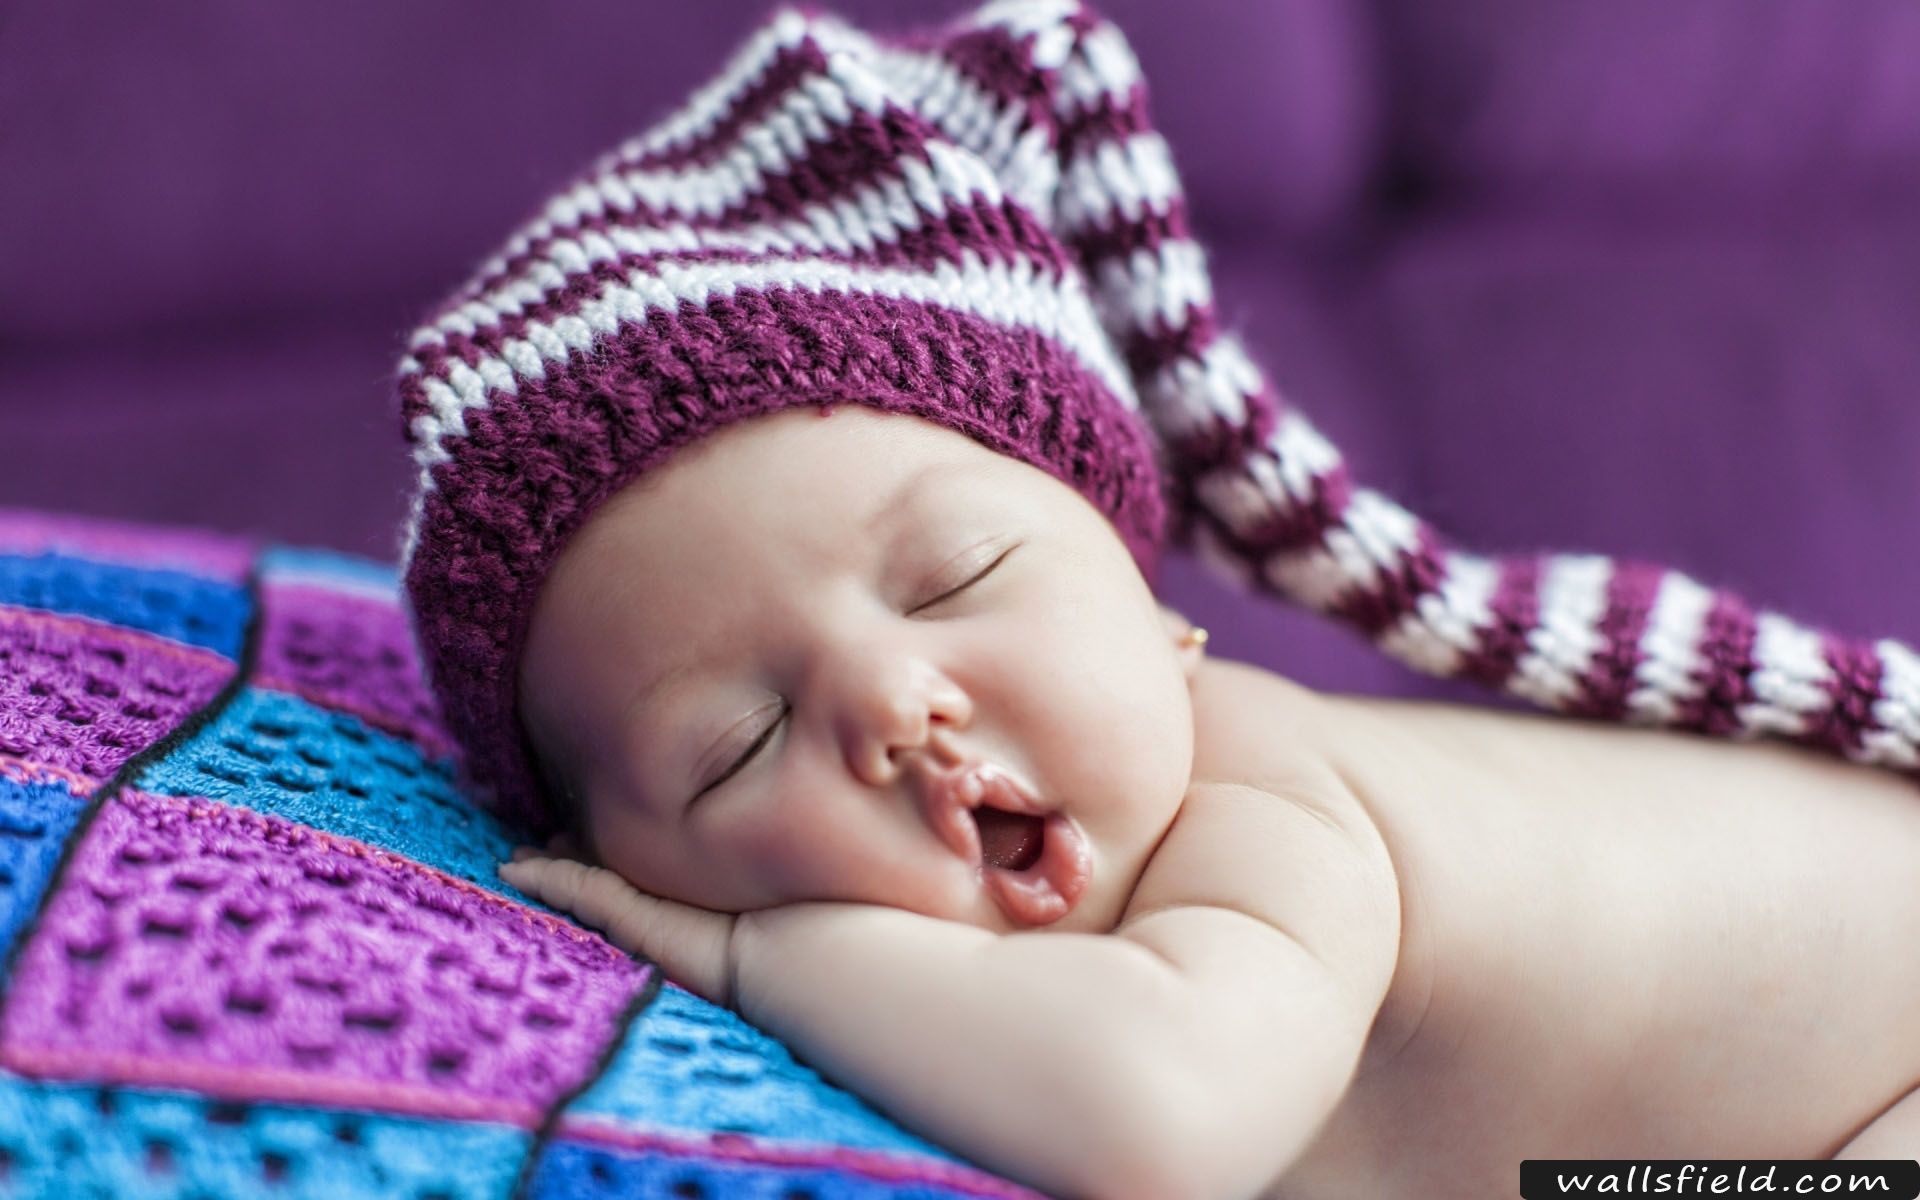 Cute Sleeping Baby. Cute baby wallpaper, Cute baby picture, How